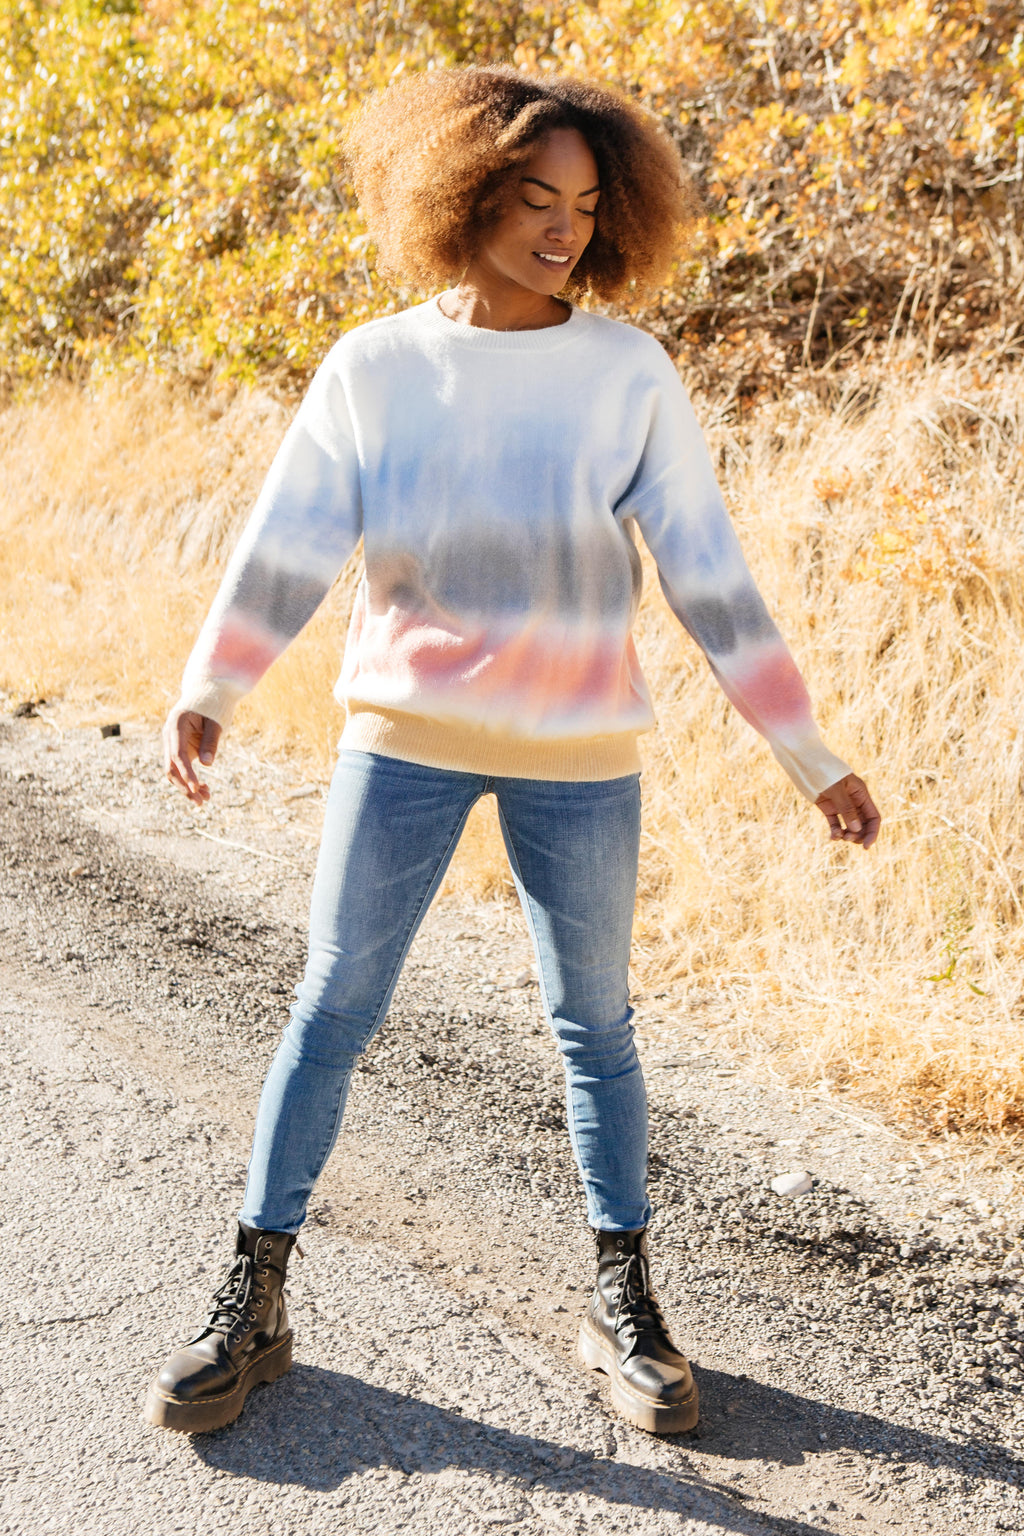 Blurred Lines Sweater-10-22-2020, 1XL, 2XL, 3XL, BFCM2020, Final Few Friday, Group A, Group B, Group C, Group D, Group V, Large, Medium, Plus, Small, Tops, XL, XS-Womens Artisan USA American Made Clothing Accessories